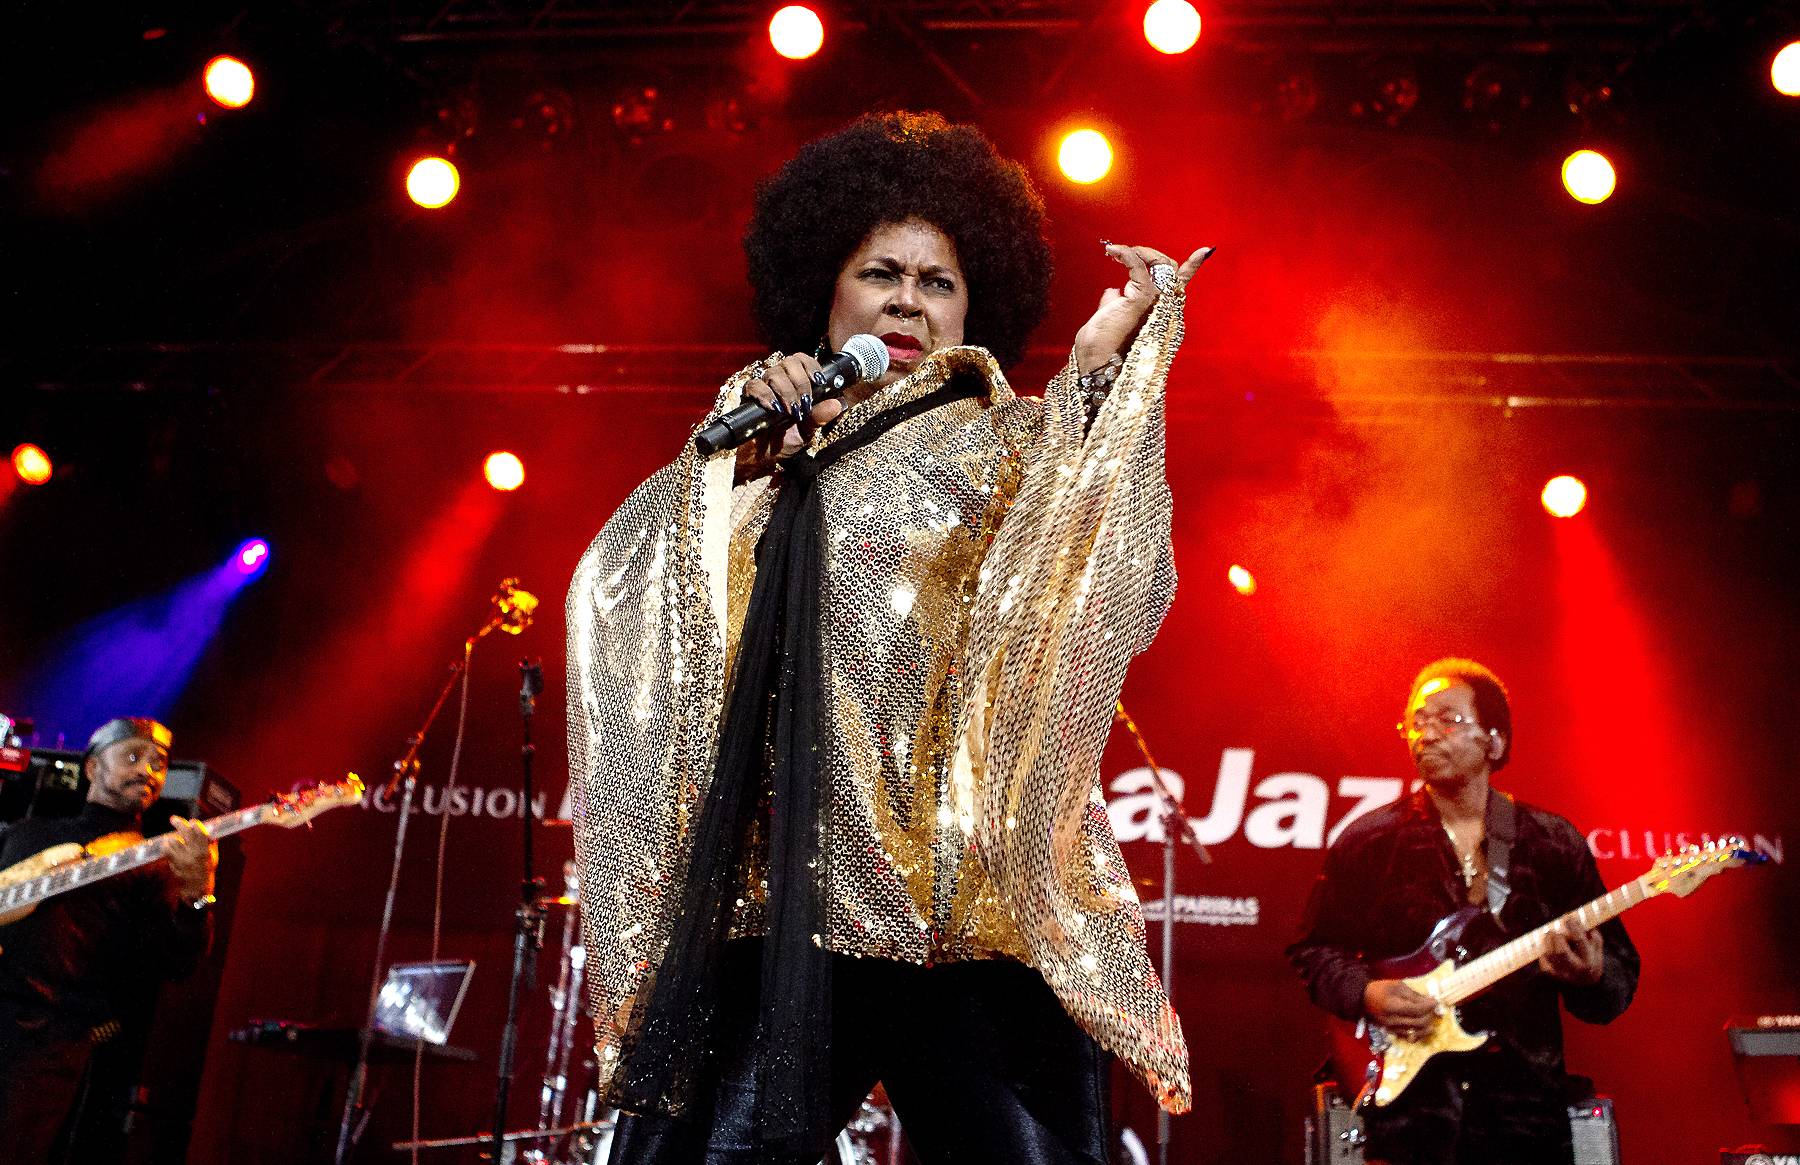 Betty Wright Is a Goddess!&nbsp; - Betty Wright went from gospel to R&amp;B and played a major role in cultivating the tradition of the genre. We can't wait to see her perform at this year's Hip Hop Awards.&nbsp;(Photo: Paul Bergen/Redferns)